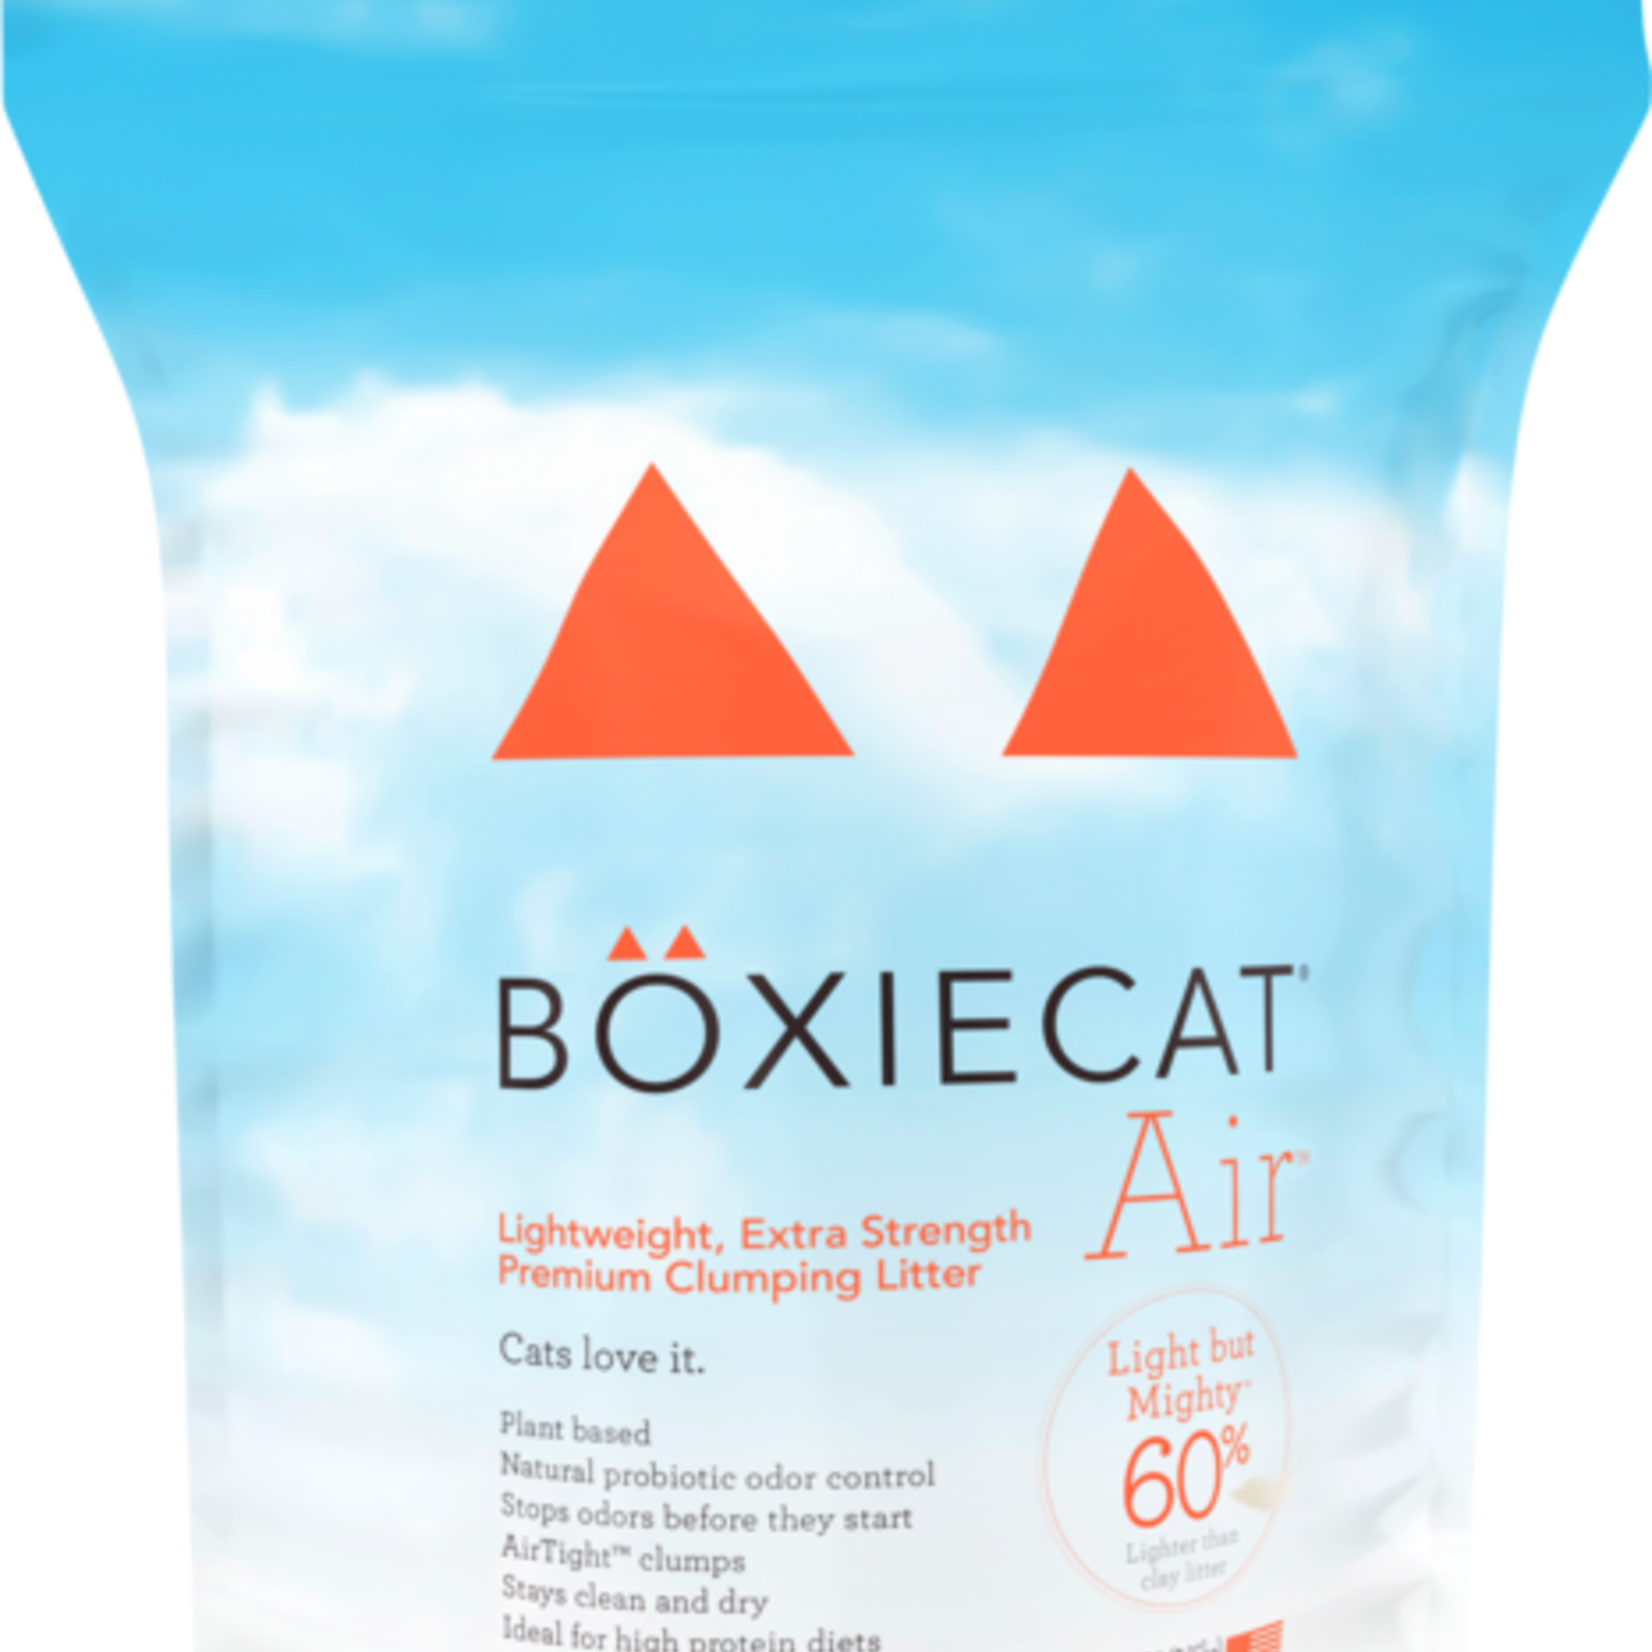 Boxie Cat Boxie Cat Air Lightweight Litter Extra Strength 6.5 #